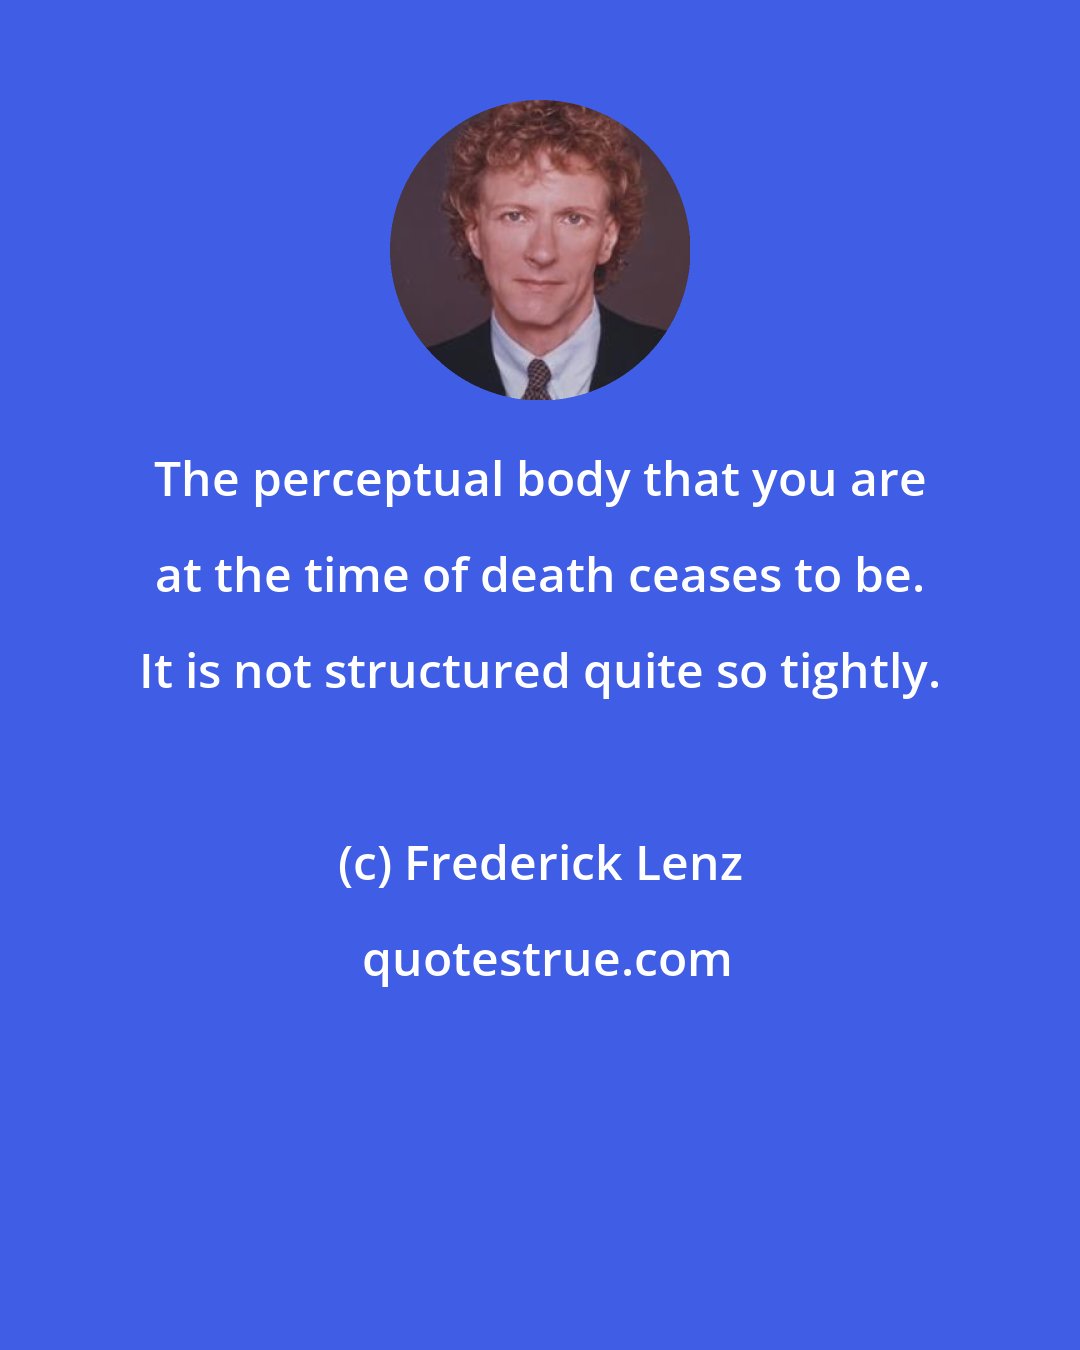 Frederick Lenz: The perceptual body that you are at the time of death ceases to be. It is not structured quite so tightly.